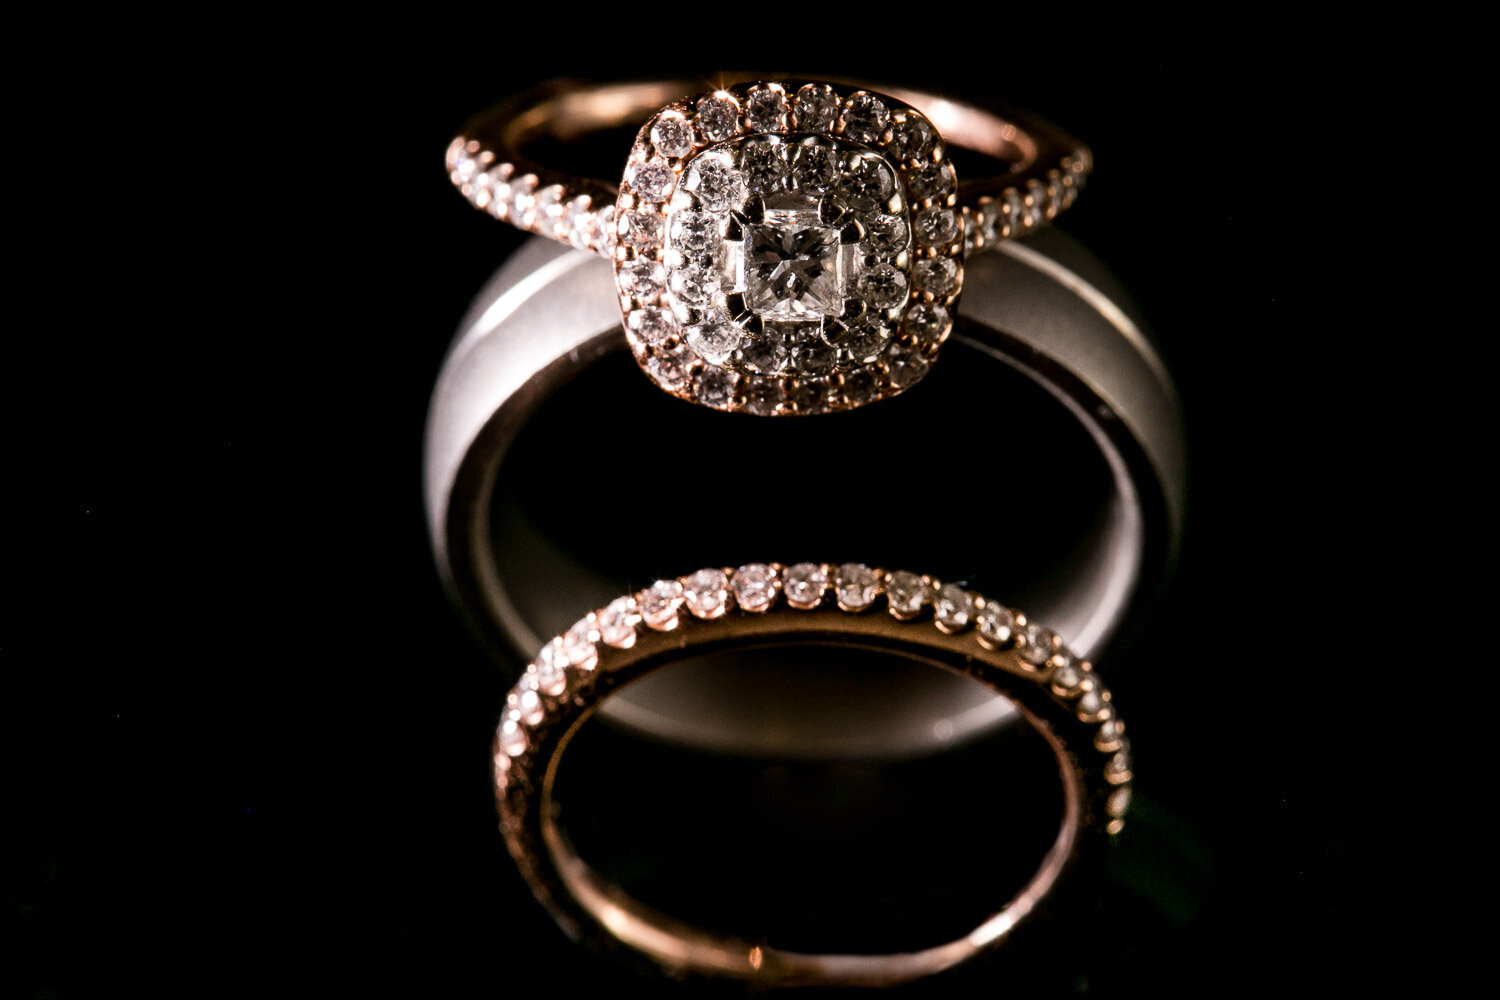 Bride's engagement and wedding ring with groom's ring.